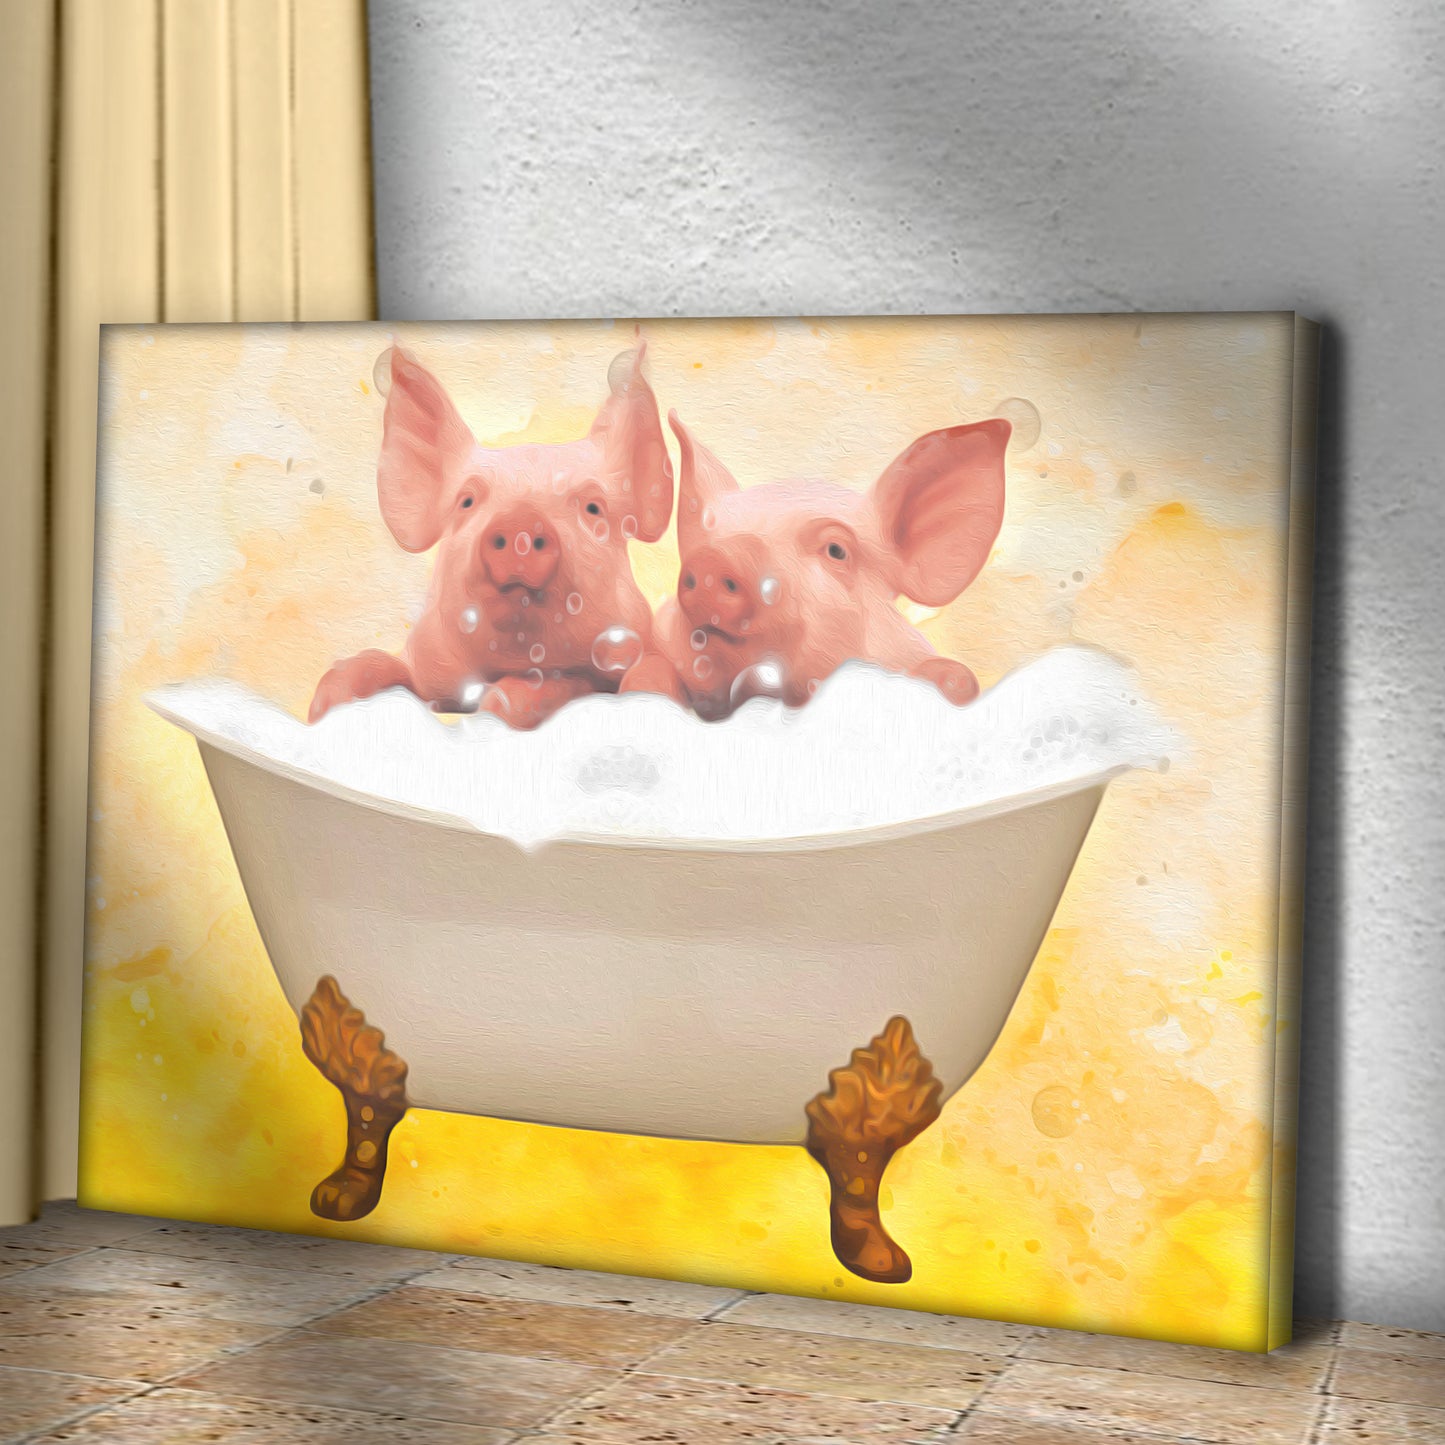 Bath Pig Buddies Canvas Wall Art Style 2 - Image by Tailored Canvases